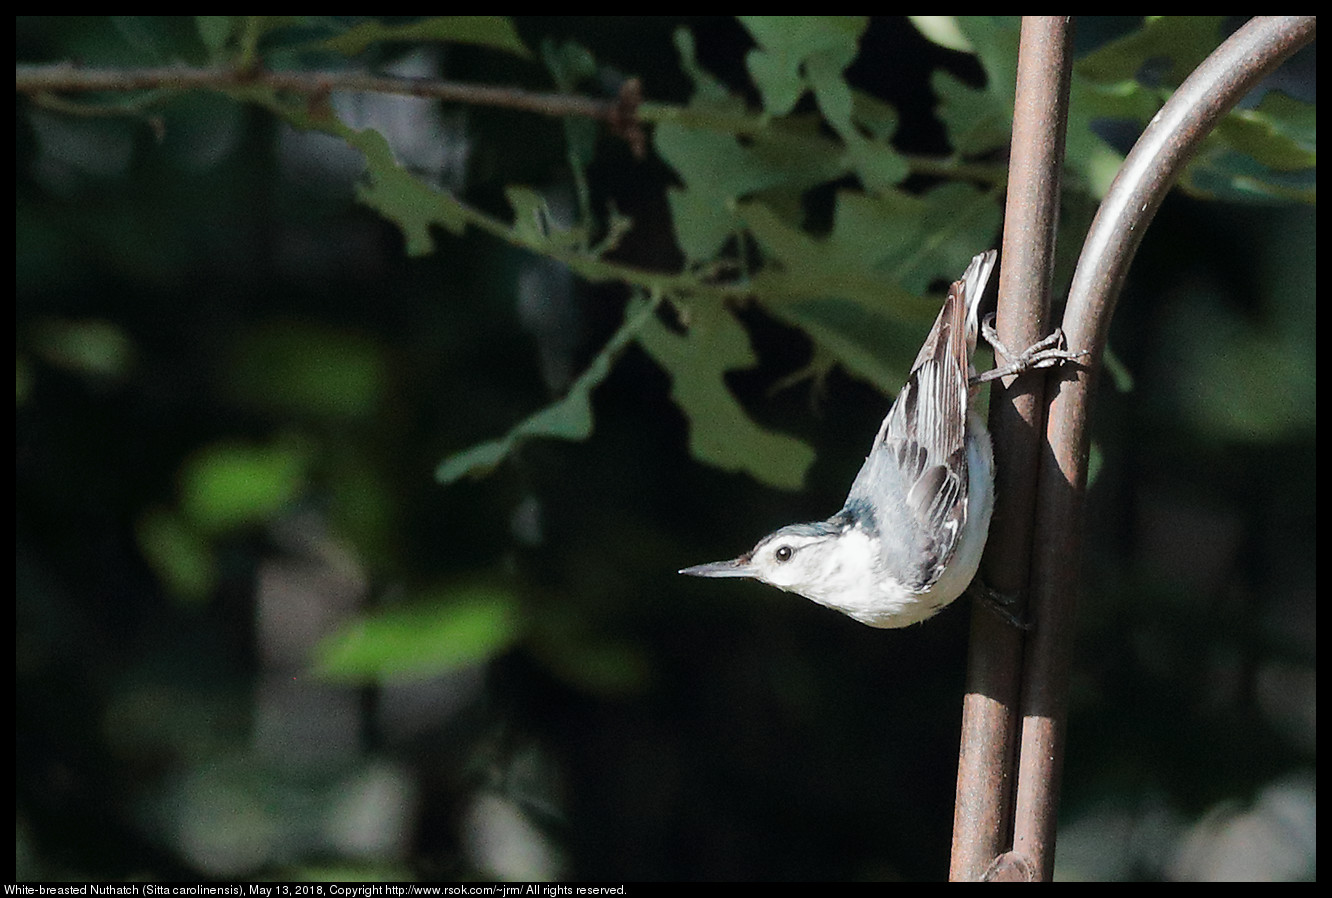 White-breasted Nuthatch (Sitta carolinensis), May 13, 2018